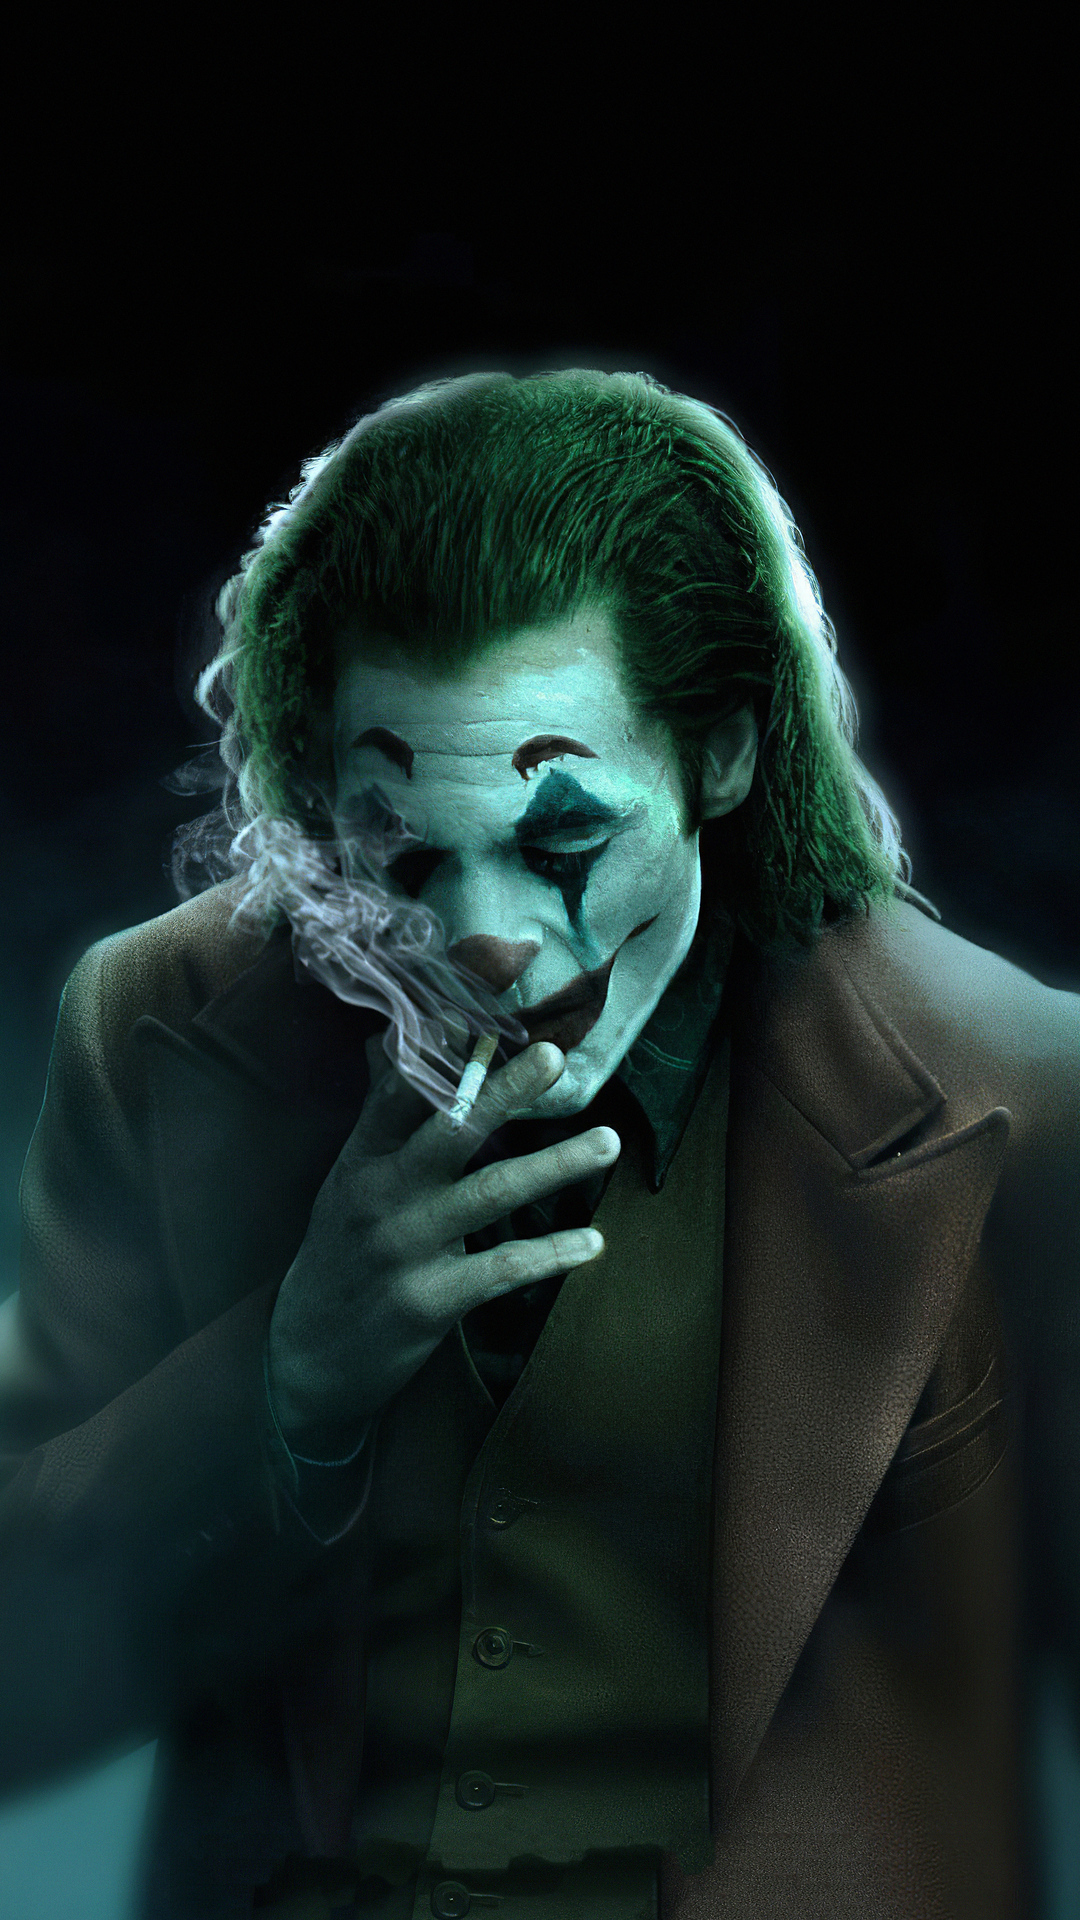 1080x1920 Joker Smoker Art 4k Iphone 7,6s,6 Plus, Pixel xl ,One Plus 3,3t,5  HD 4k Wallpapers, Images, Backgrounds, Photos and Pictures